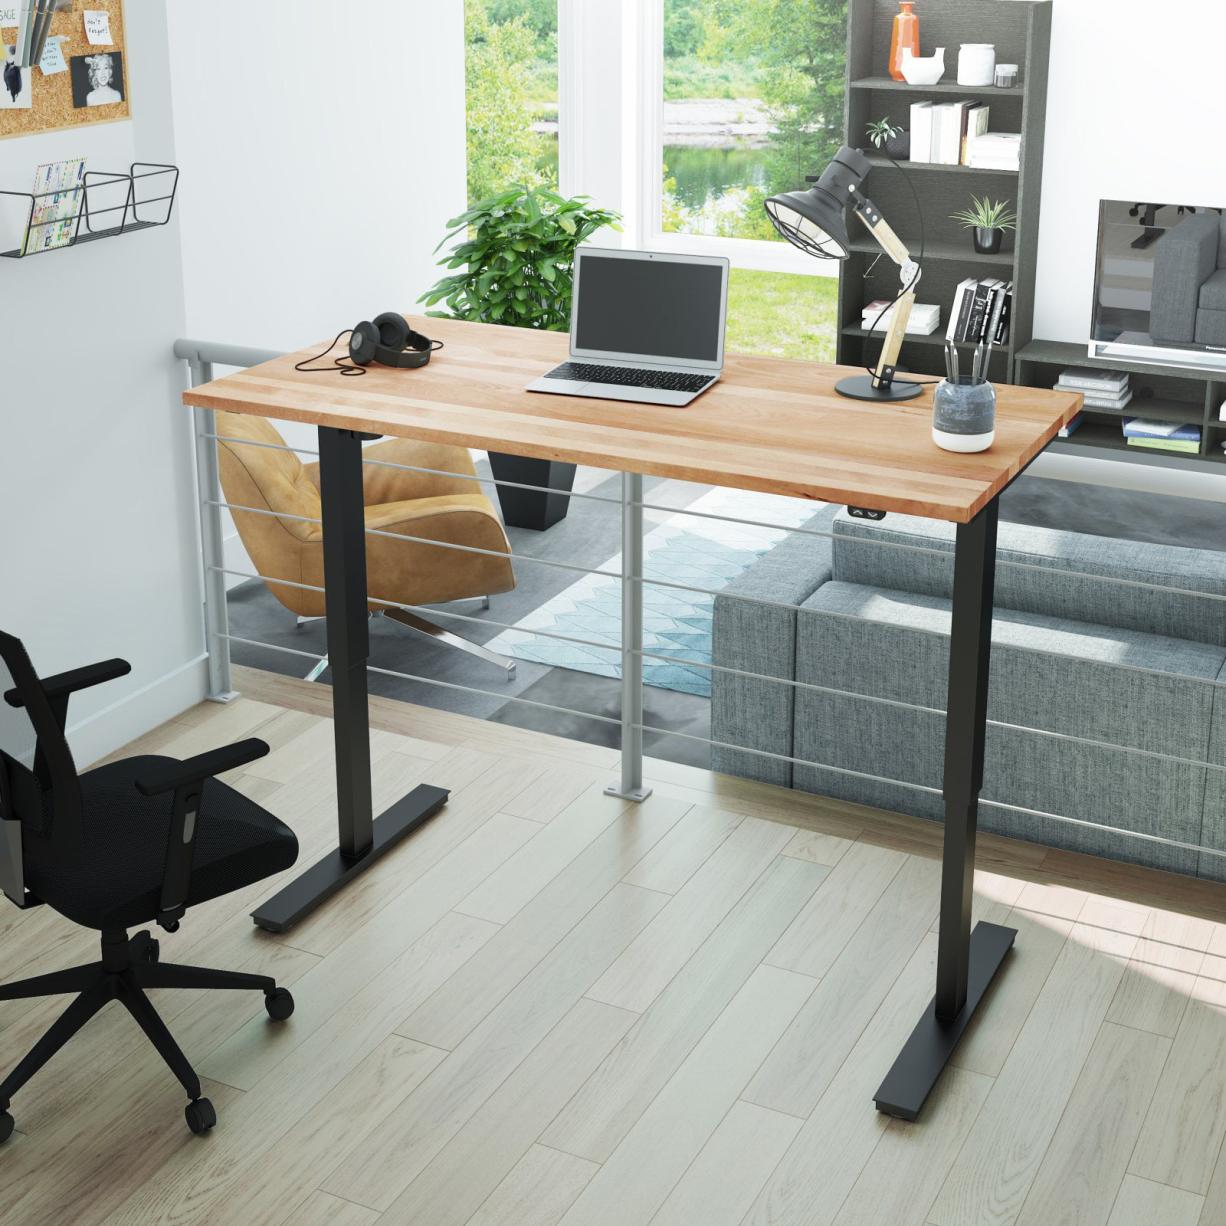 What Are the Pros and Cons of Using a Standing Desk as a Business Partner?